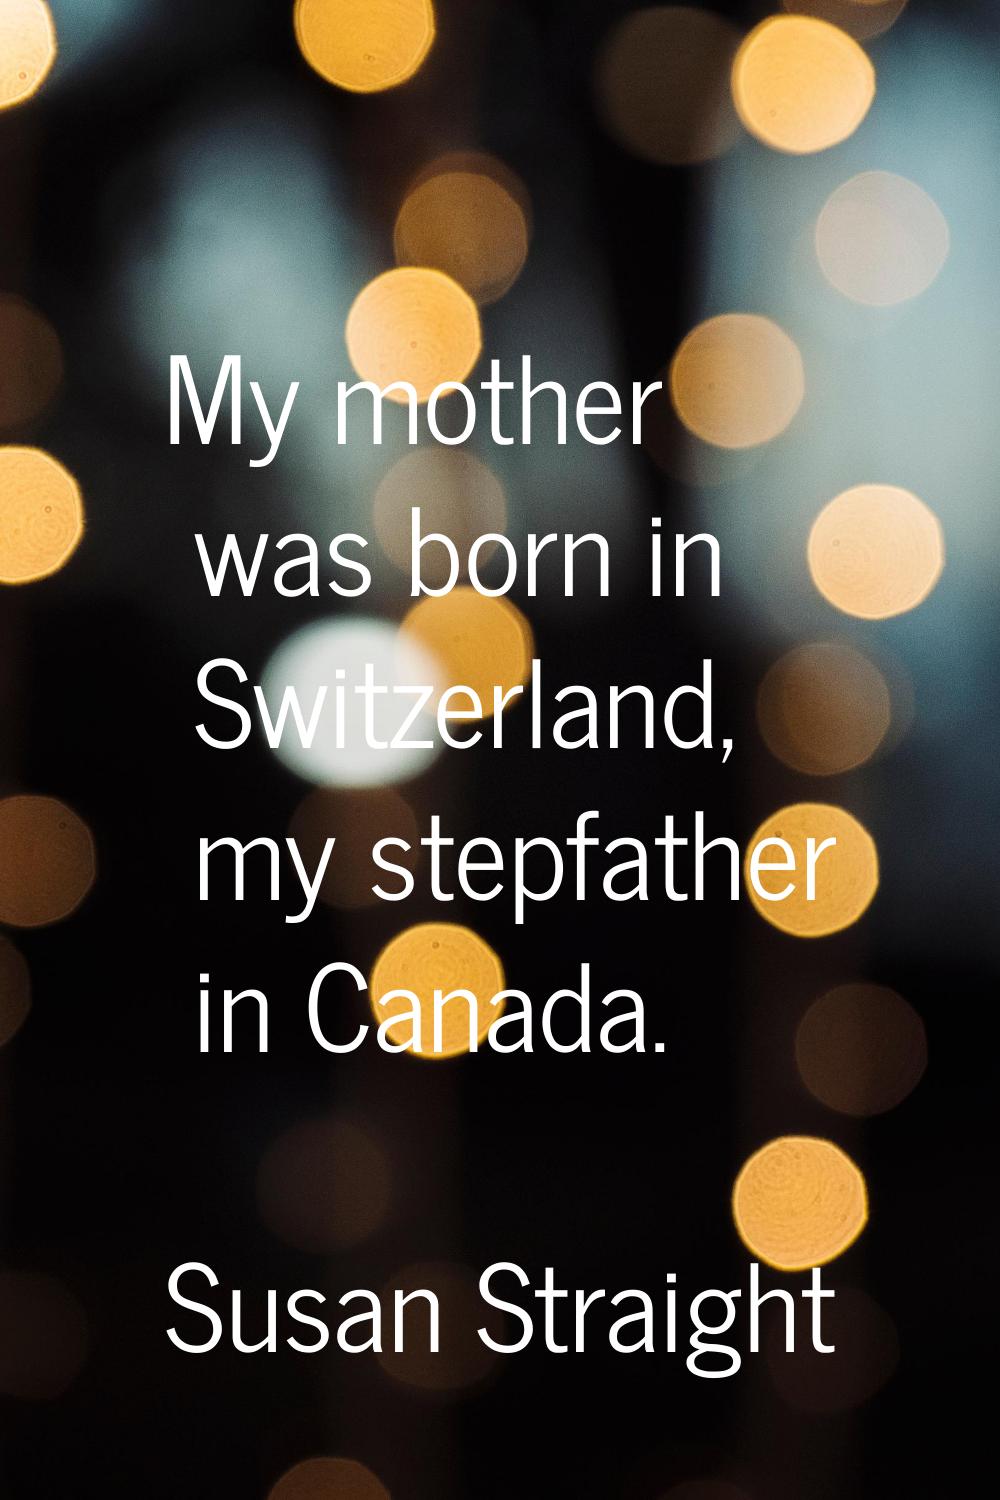 My mother was born in Switzerland, my stepfather in Canada.